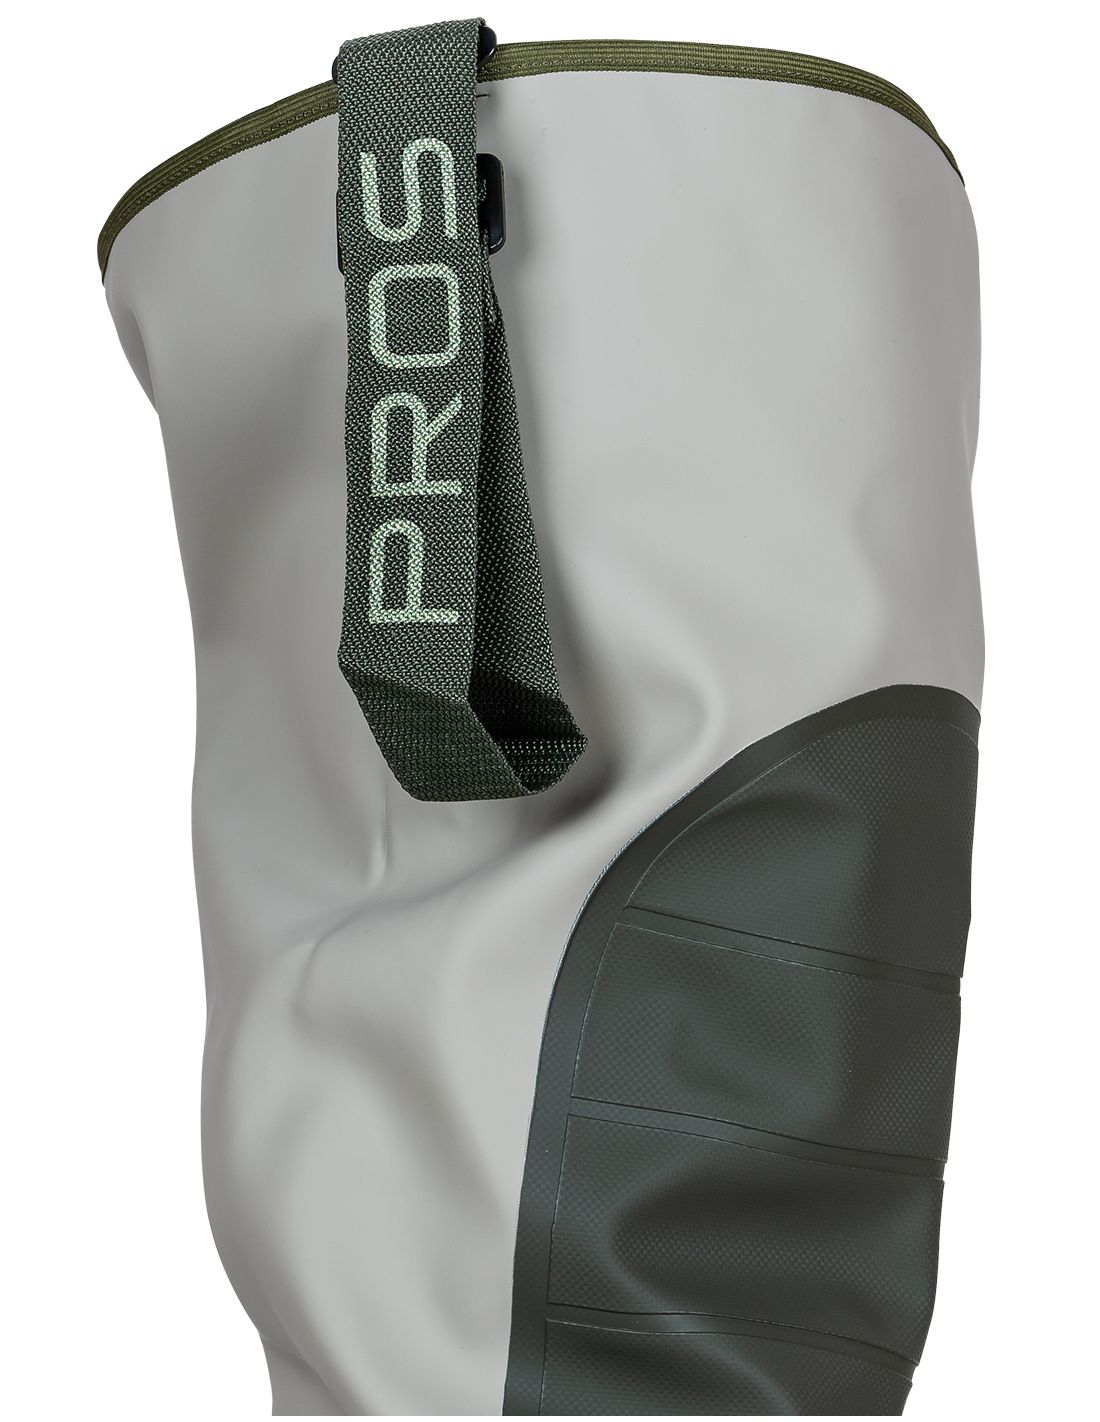 Thigh Waders PREMIUM (Reinforced) - PROS